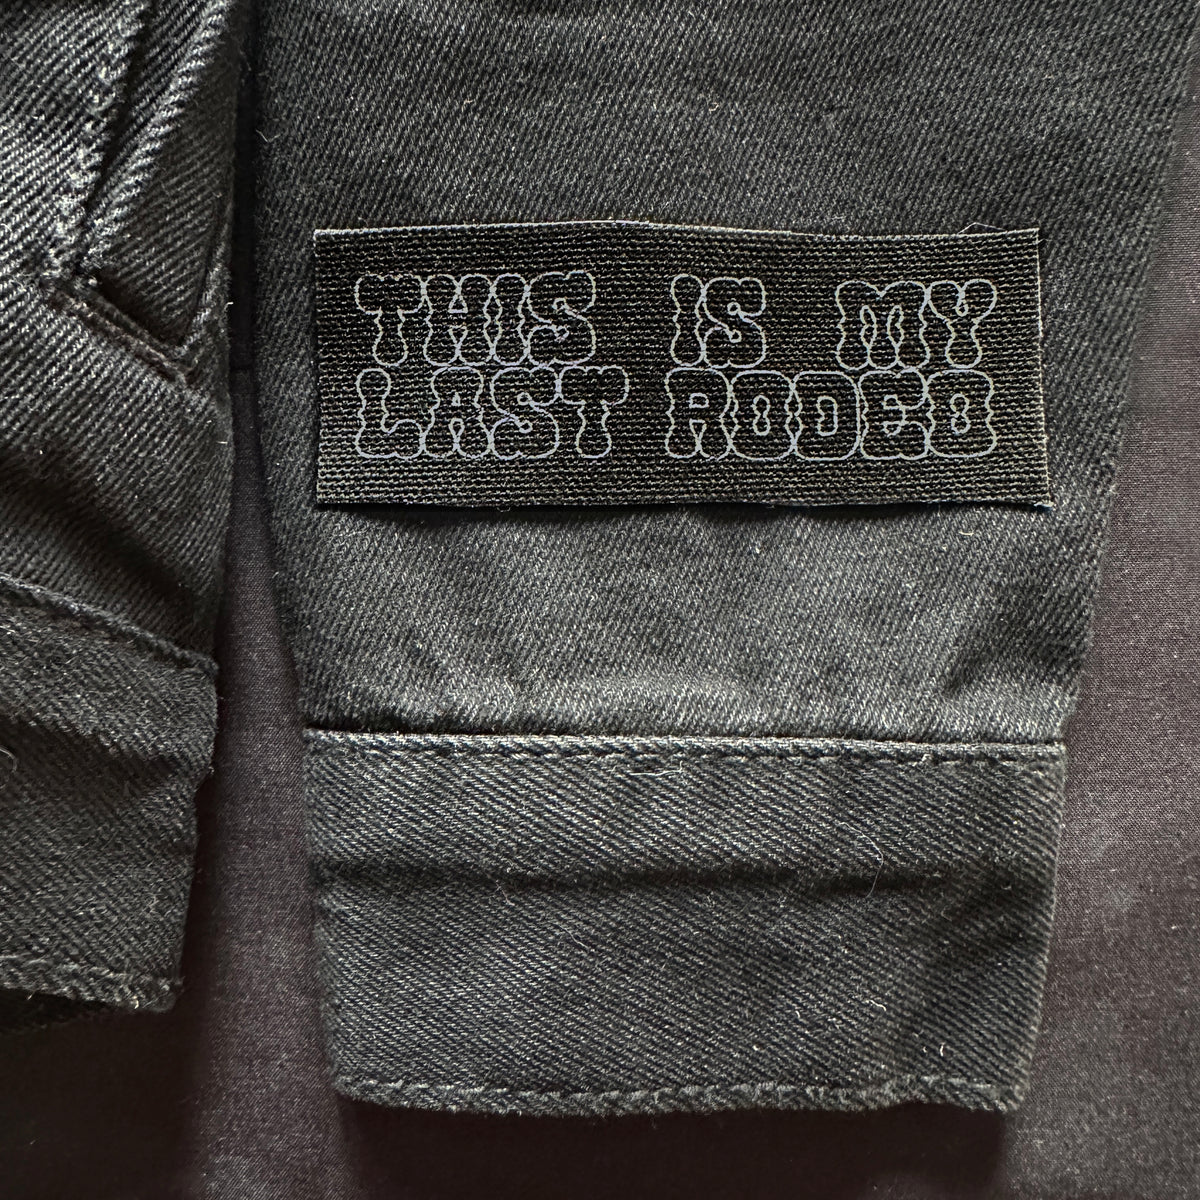 This is My Last Rodeo Fabric Patch